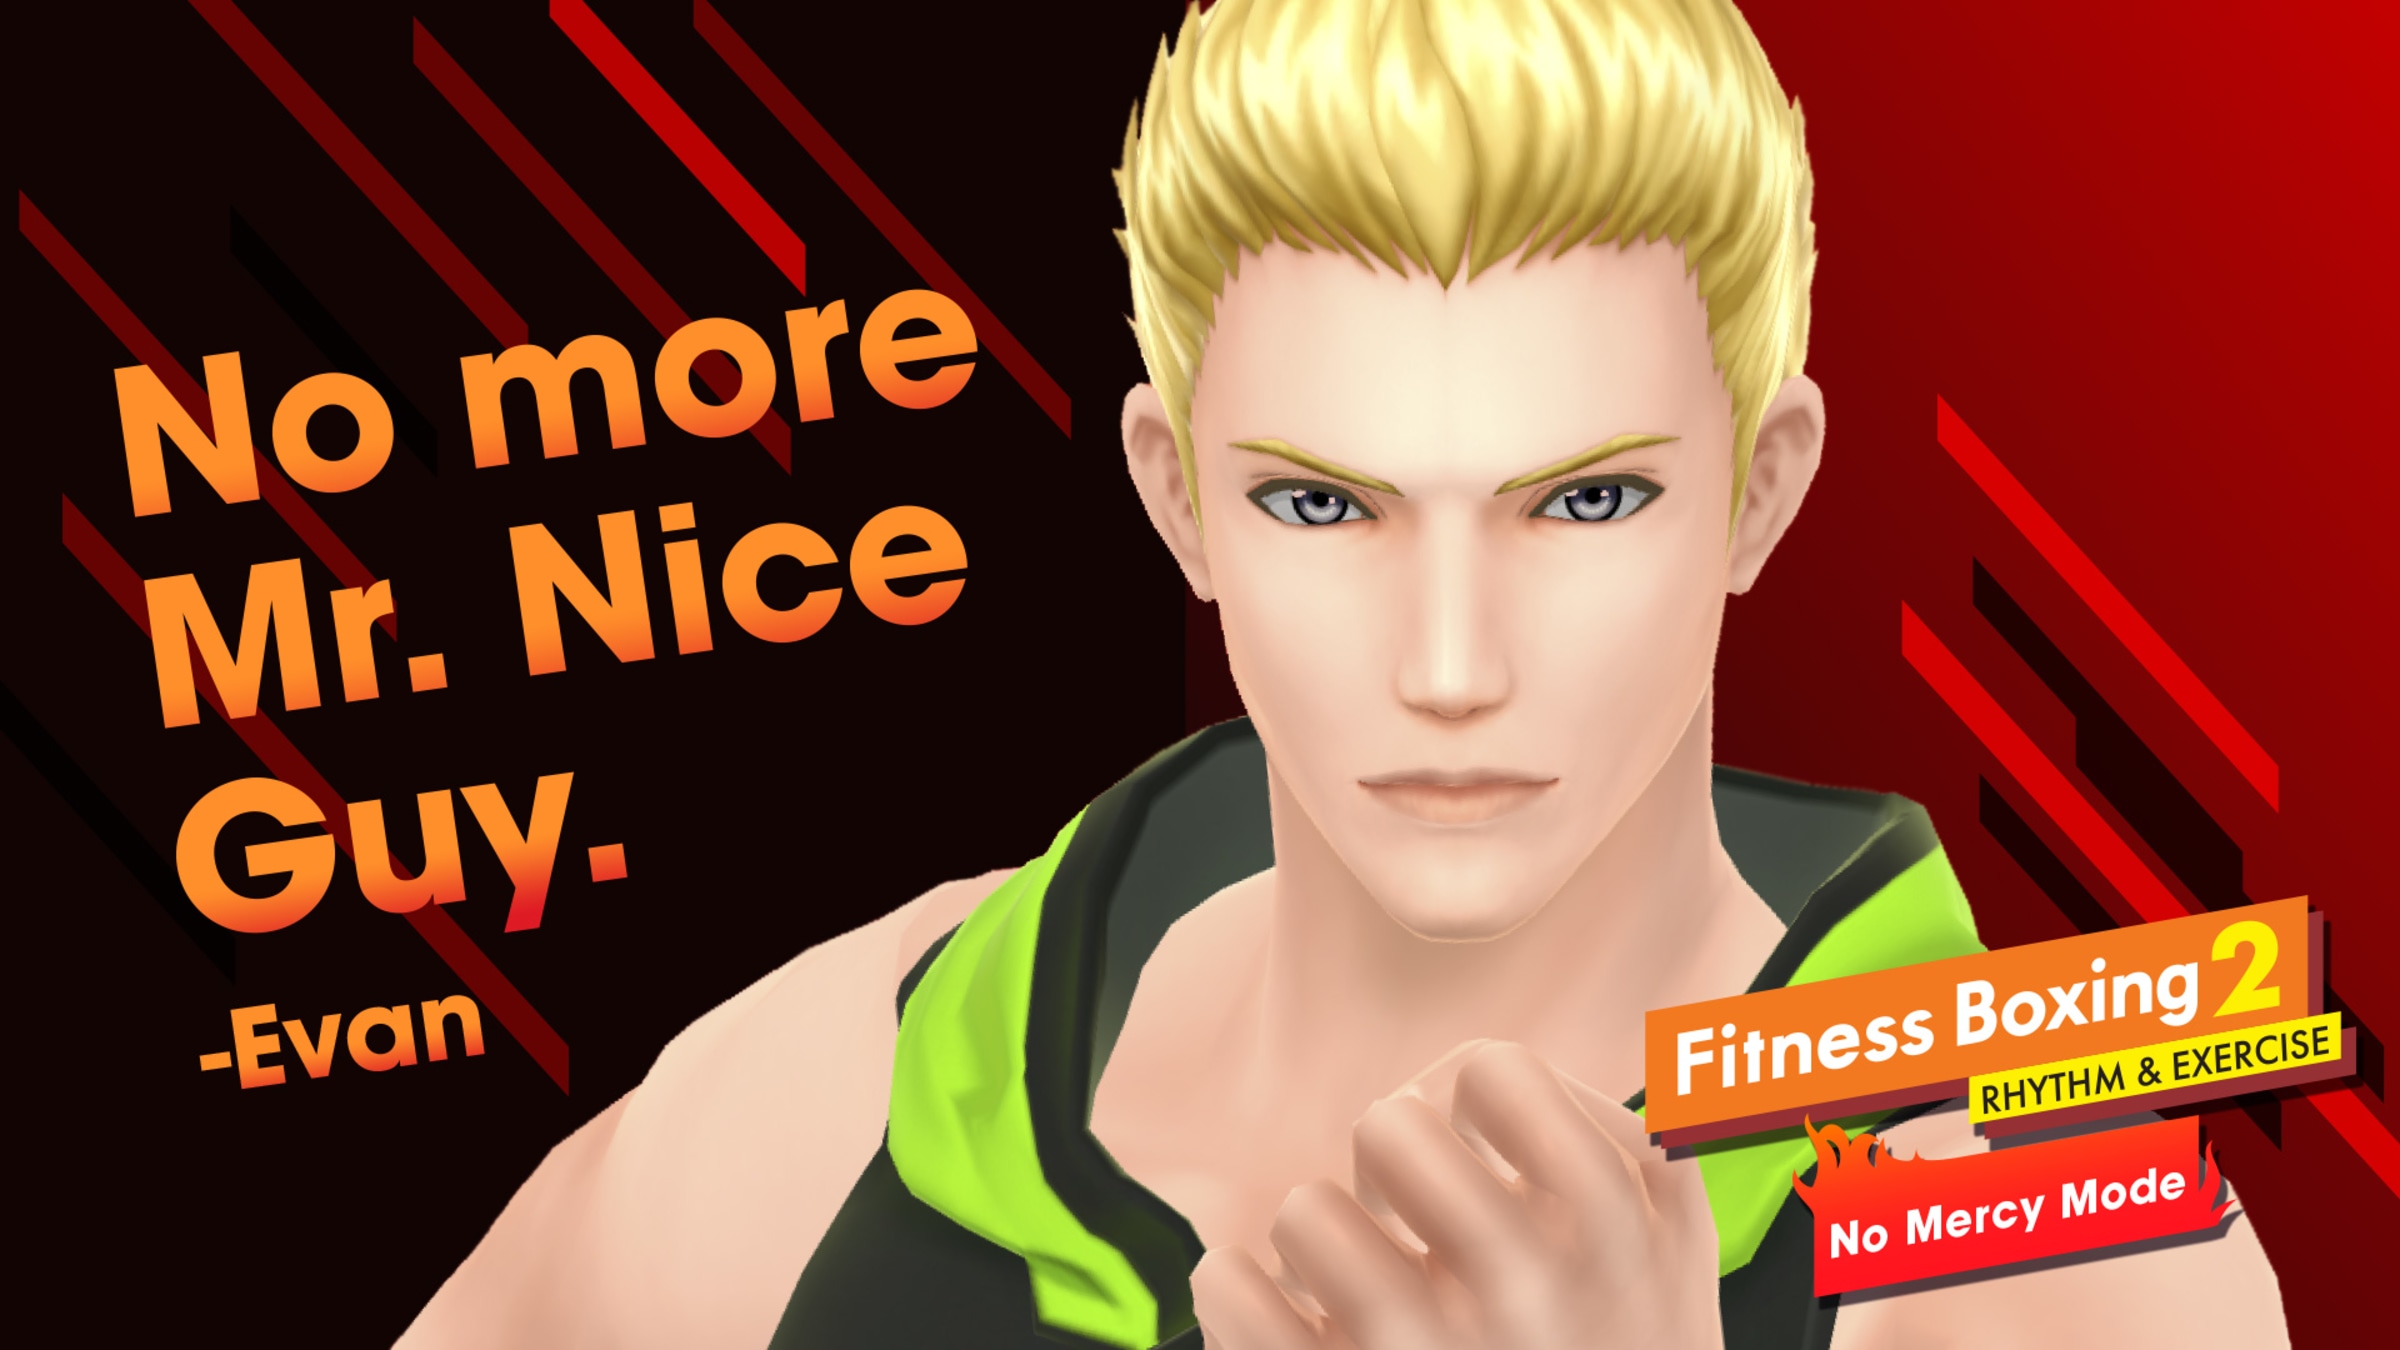 No Switch Nintendo Official - 2: Site Rhythm Nintendo Exercise Boxing & intensity: Evan Mercy Fitness for